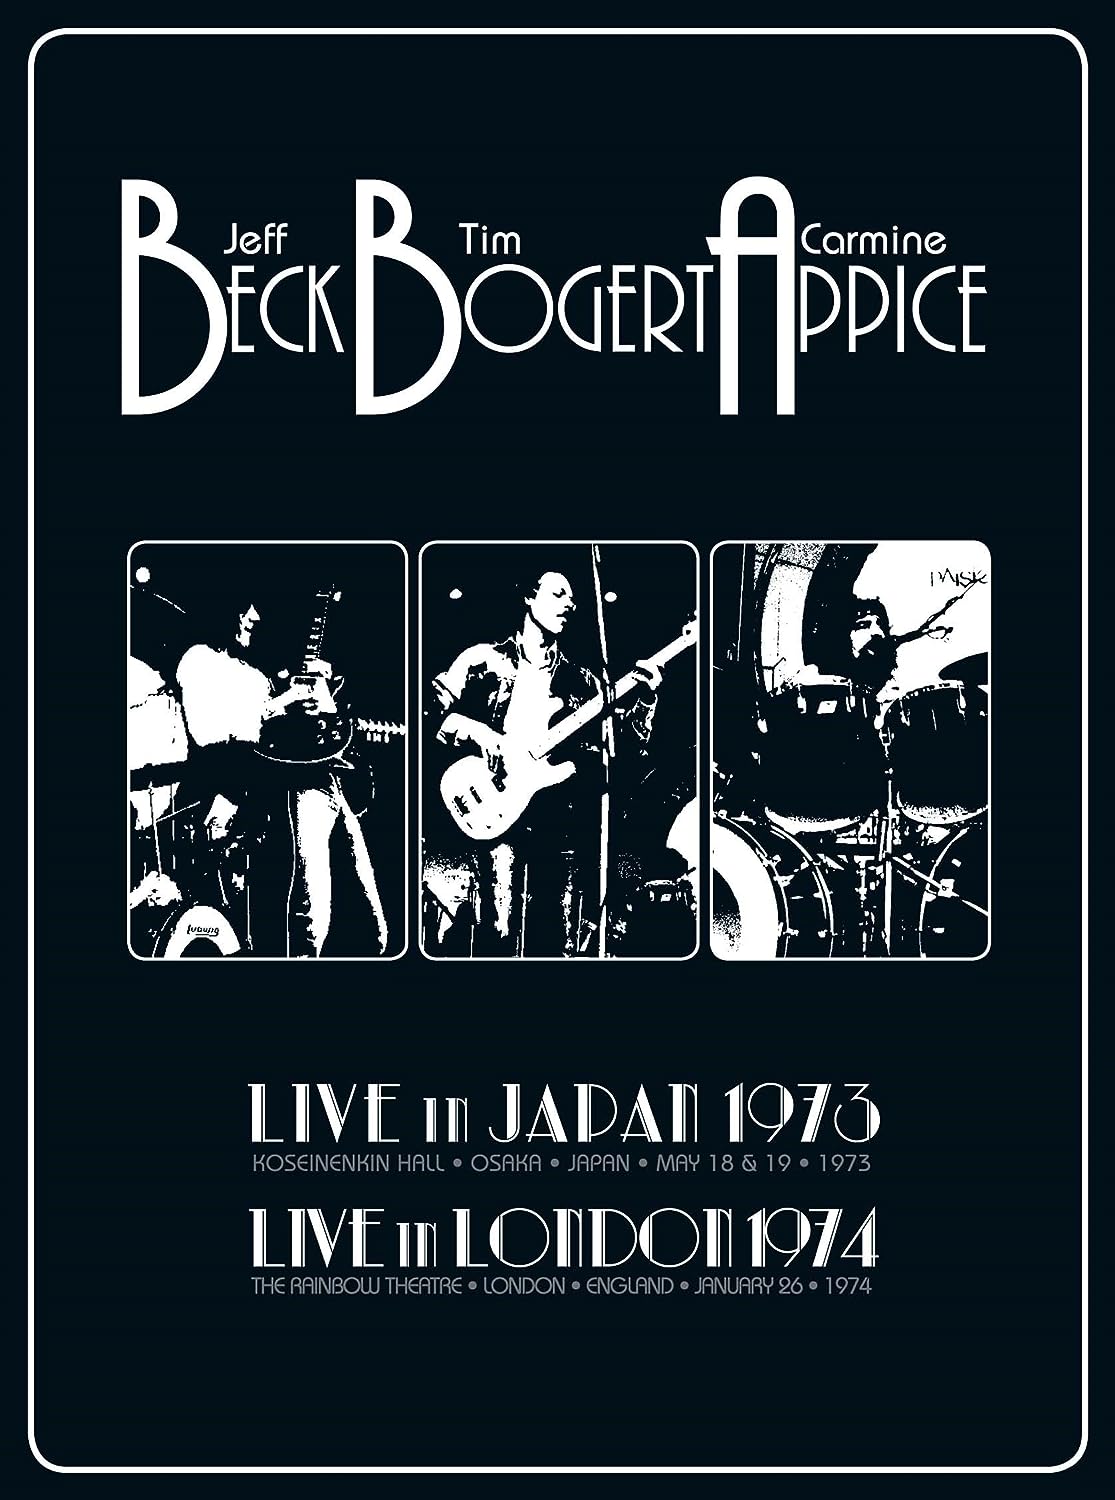 Beck, Bogert & Appice Live In Japan 1973, Live In London 1974